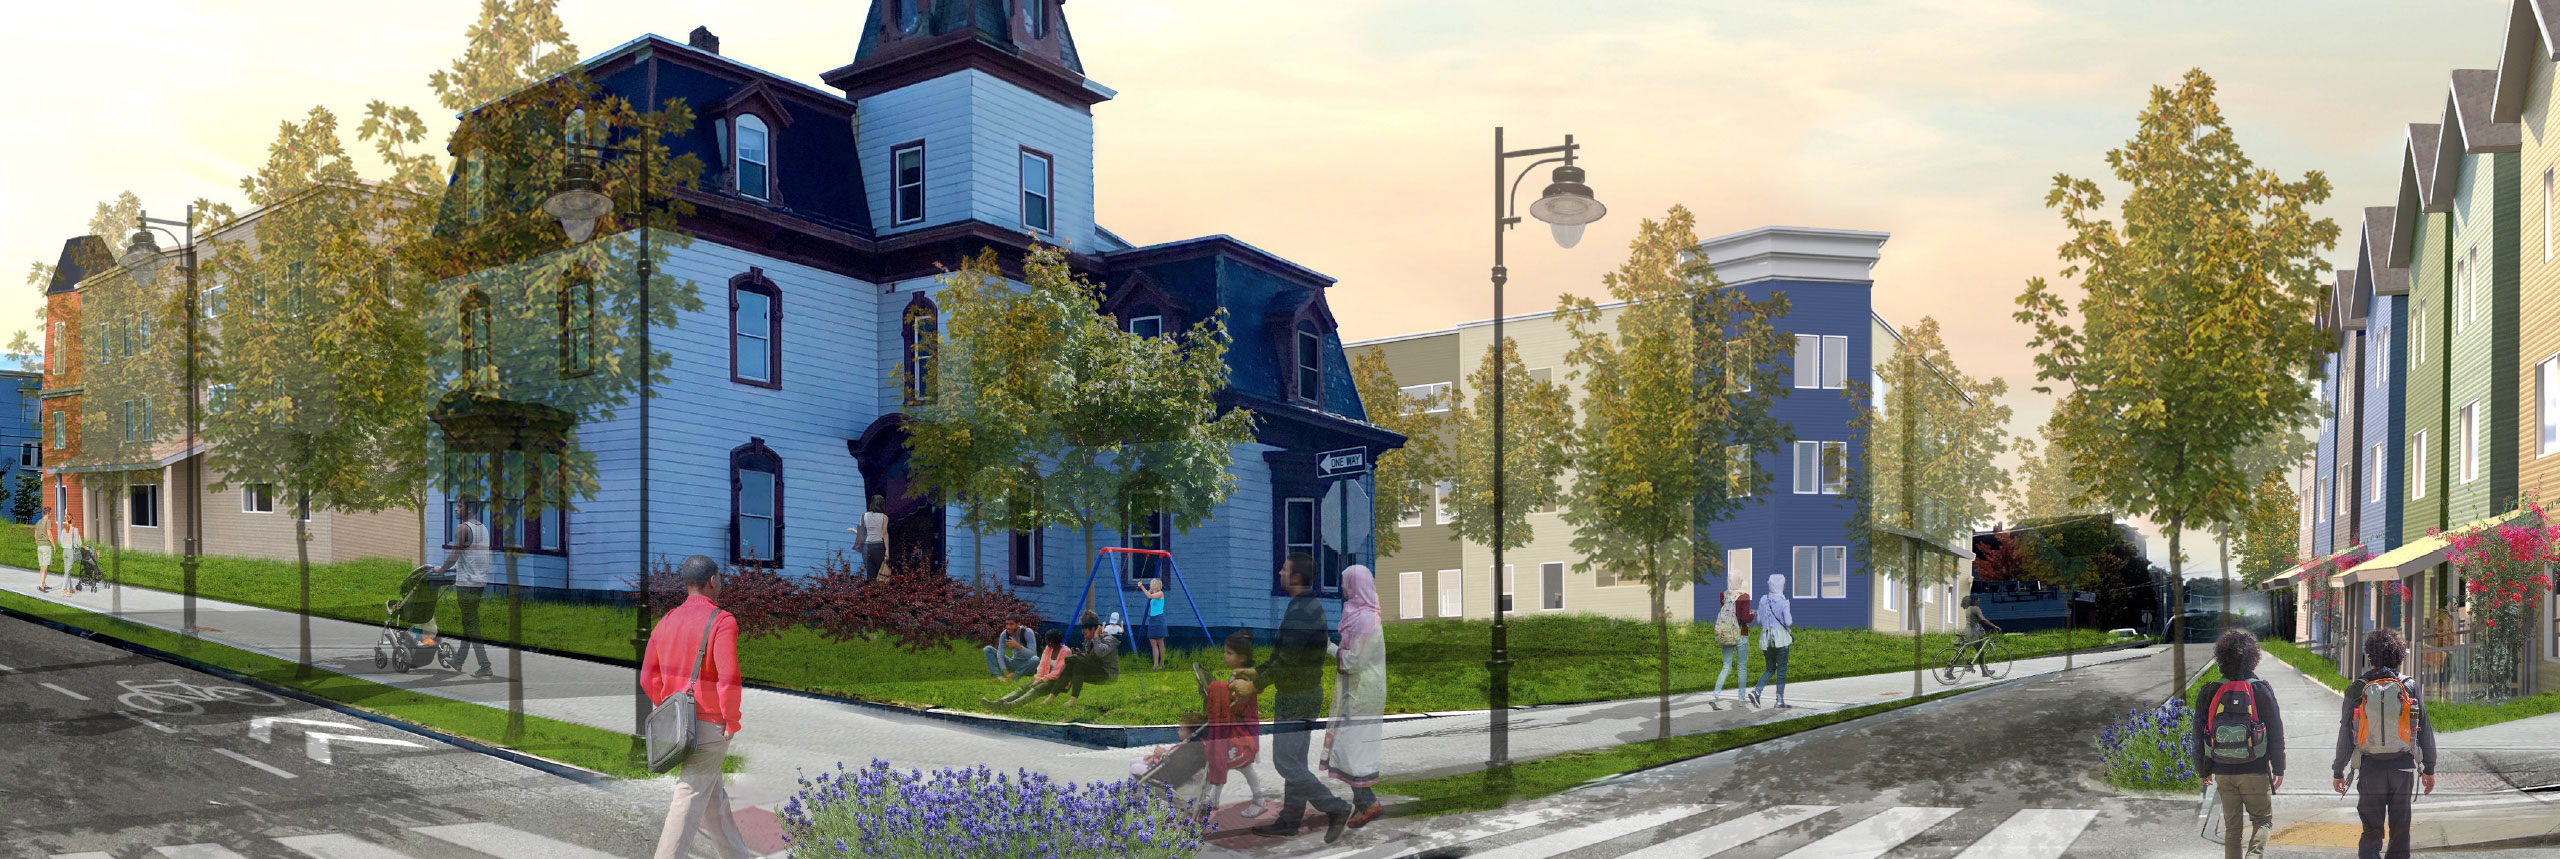 A rendering of a neighborhood transformation with condos on one side of the road with old homes on the other.